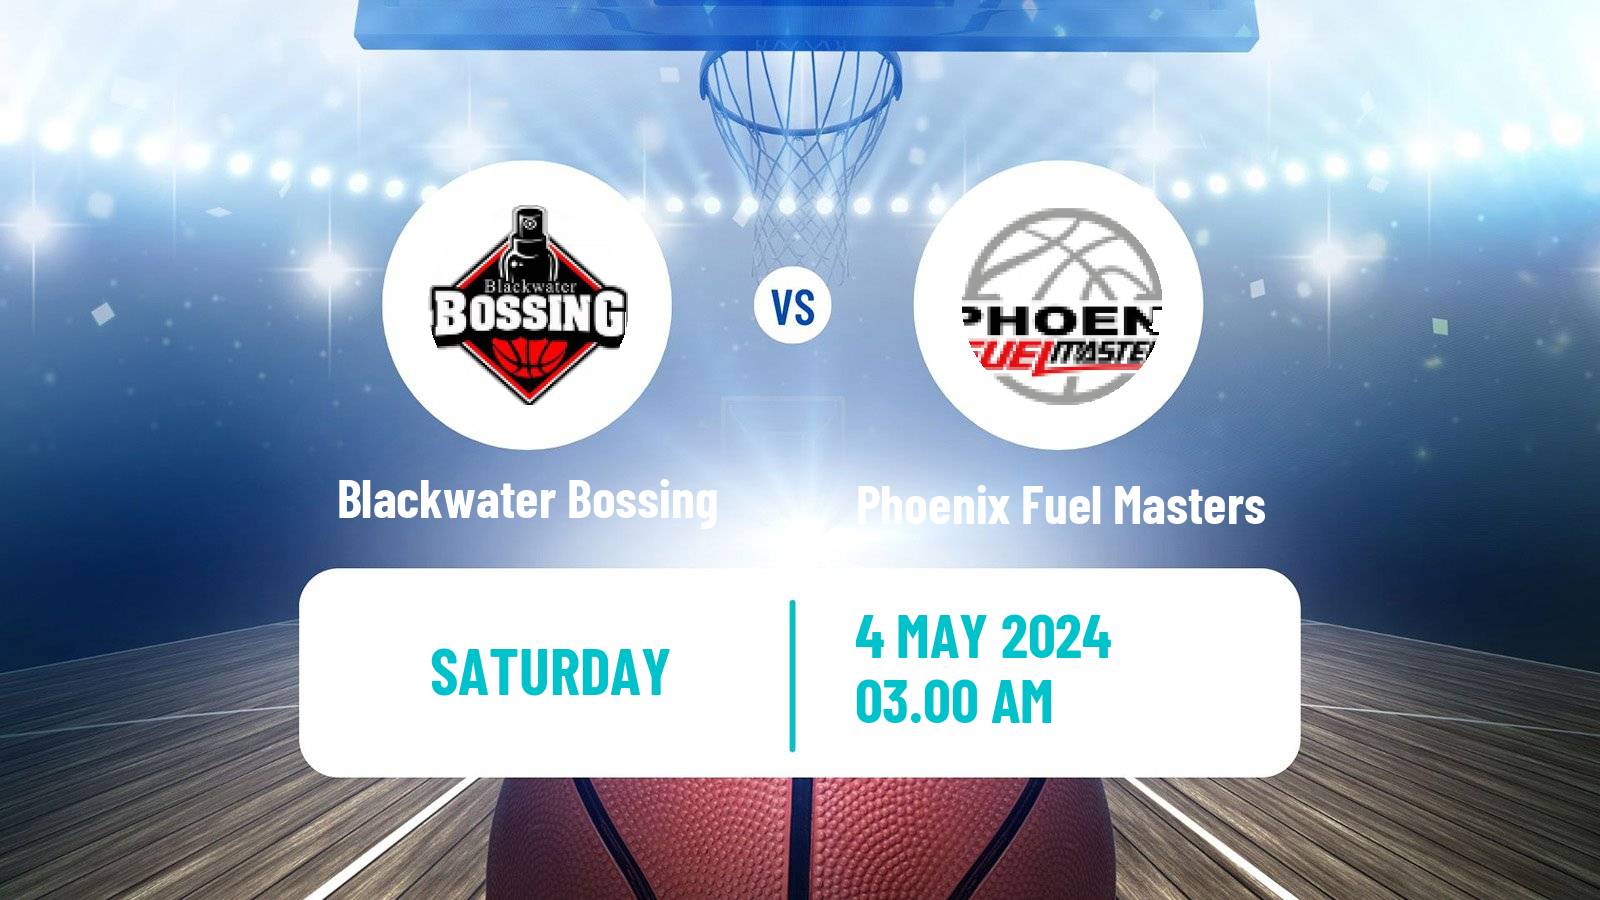 Basketball Philippines Cup Blackwater Bossing - Phoenix Fuel Masters